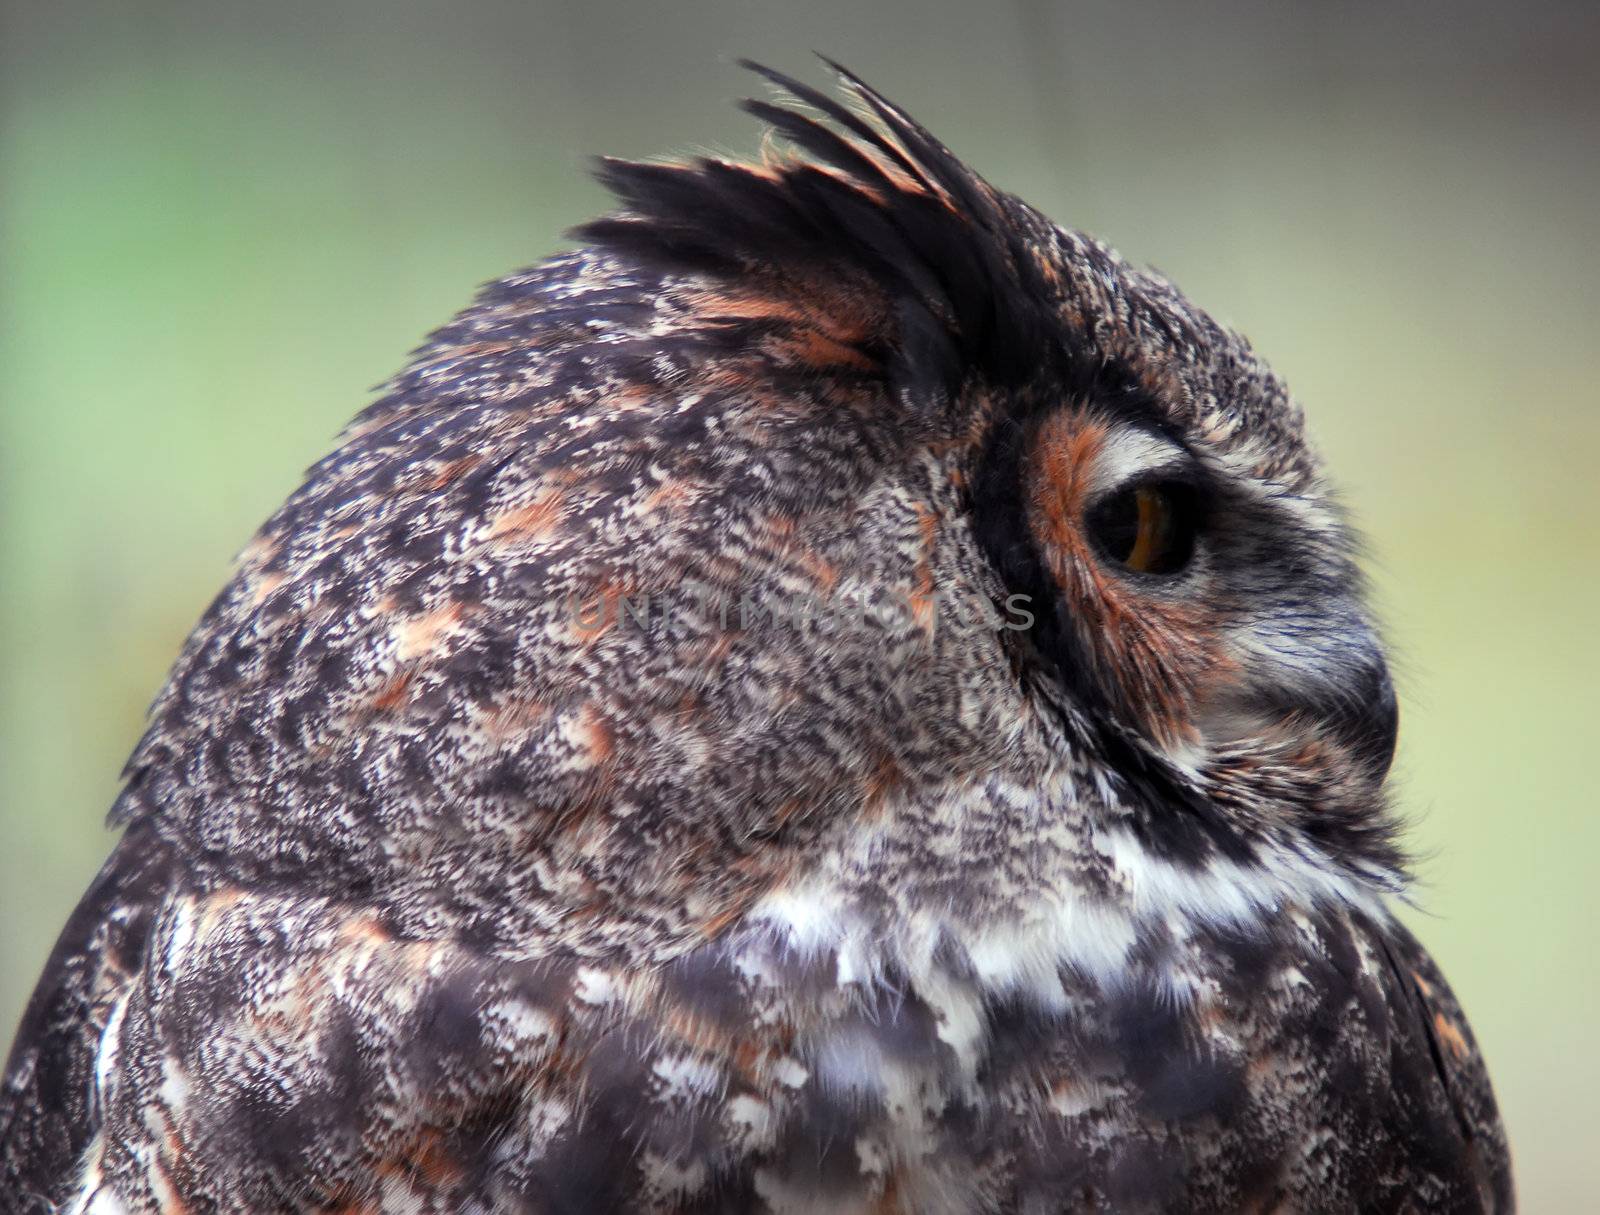 Portrait of a Spotted Eagle Owl (Bubo africanus)